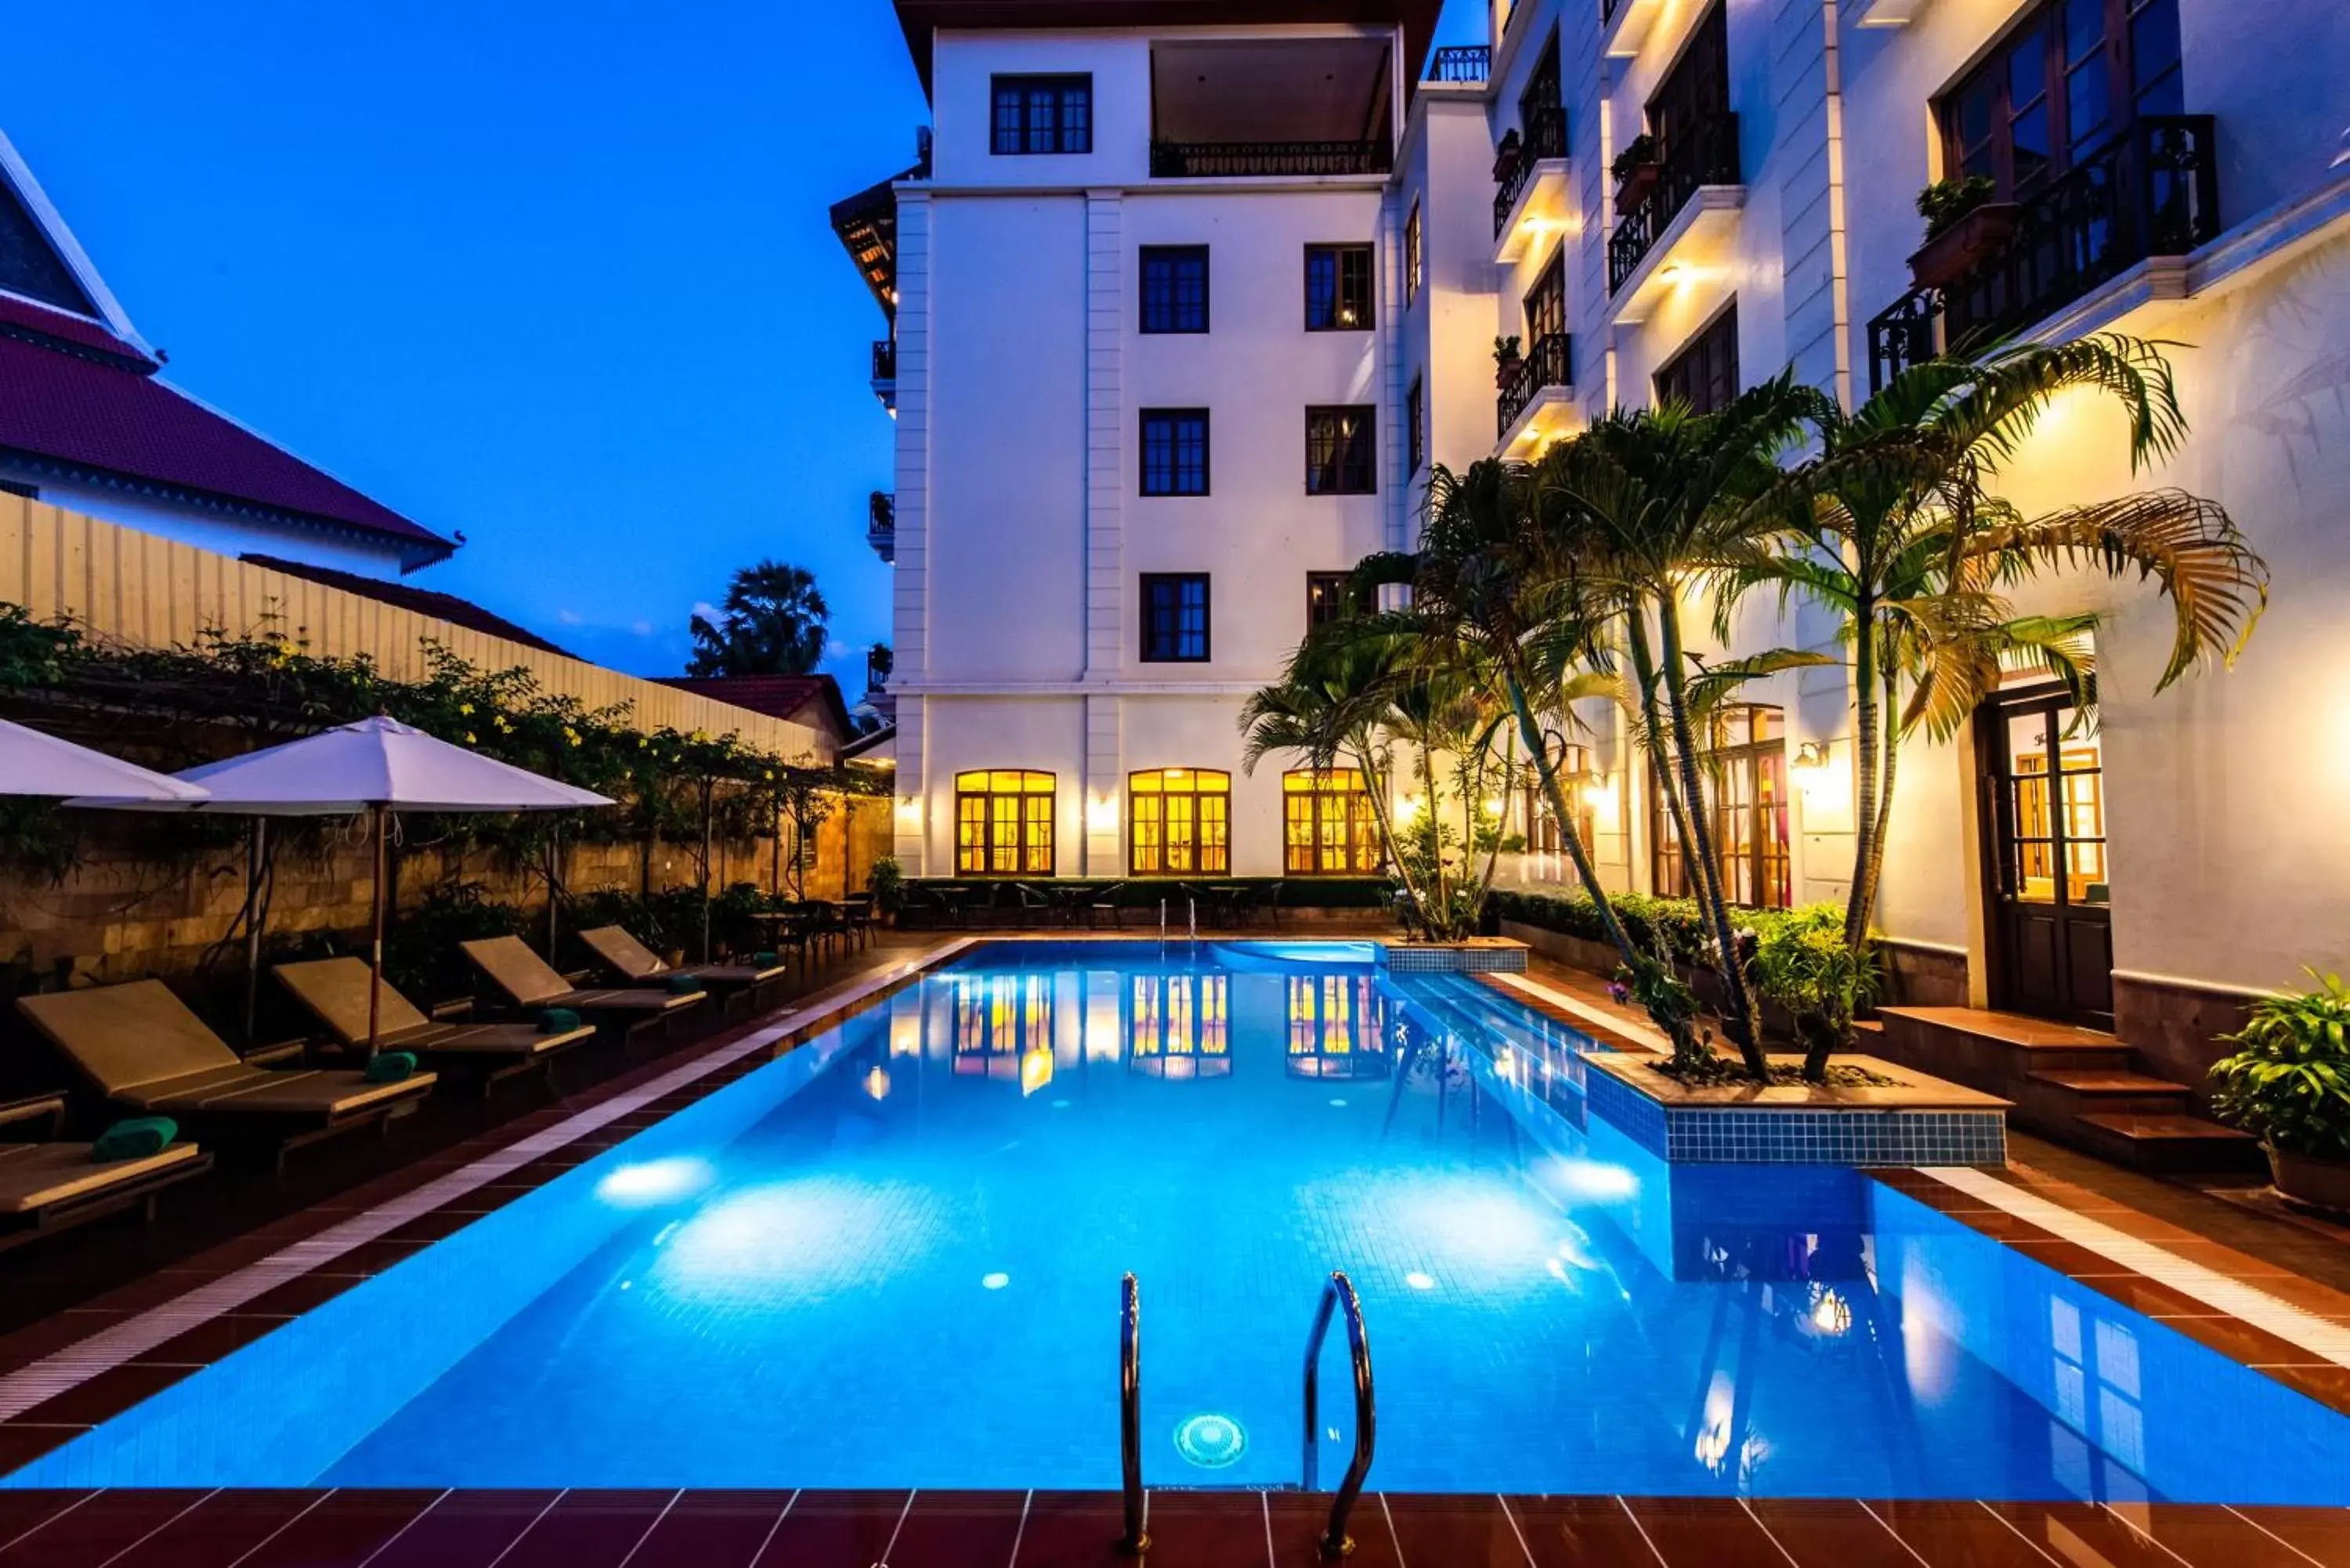 Property building, Swimming Pool in Steung Siemreap Hotel